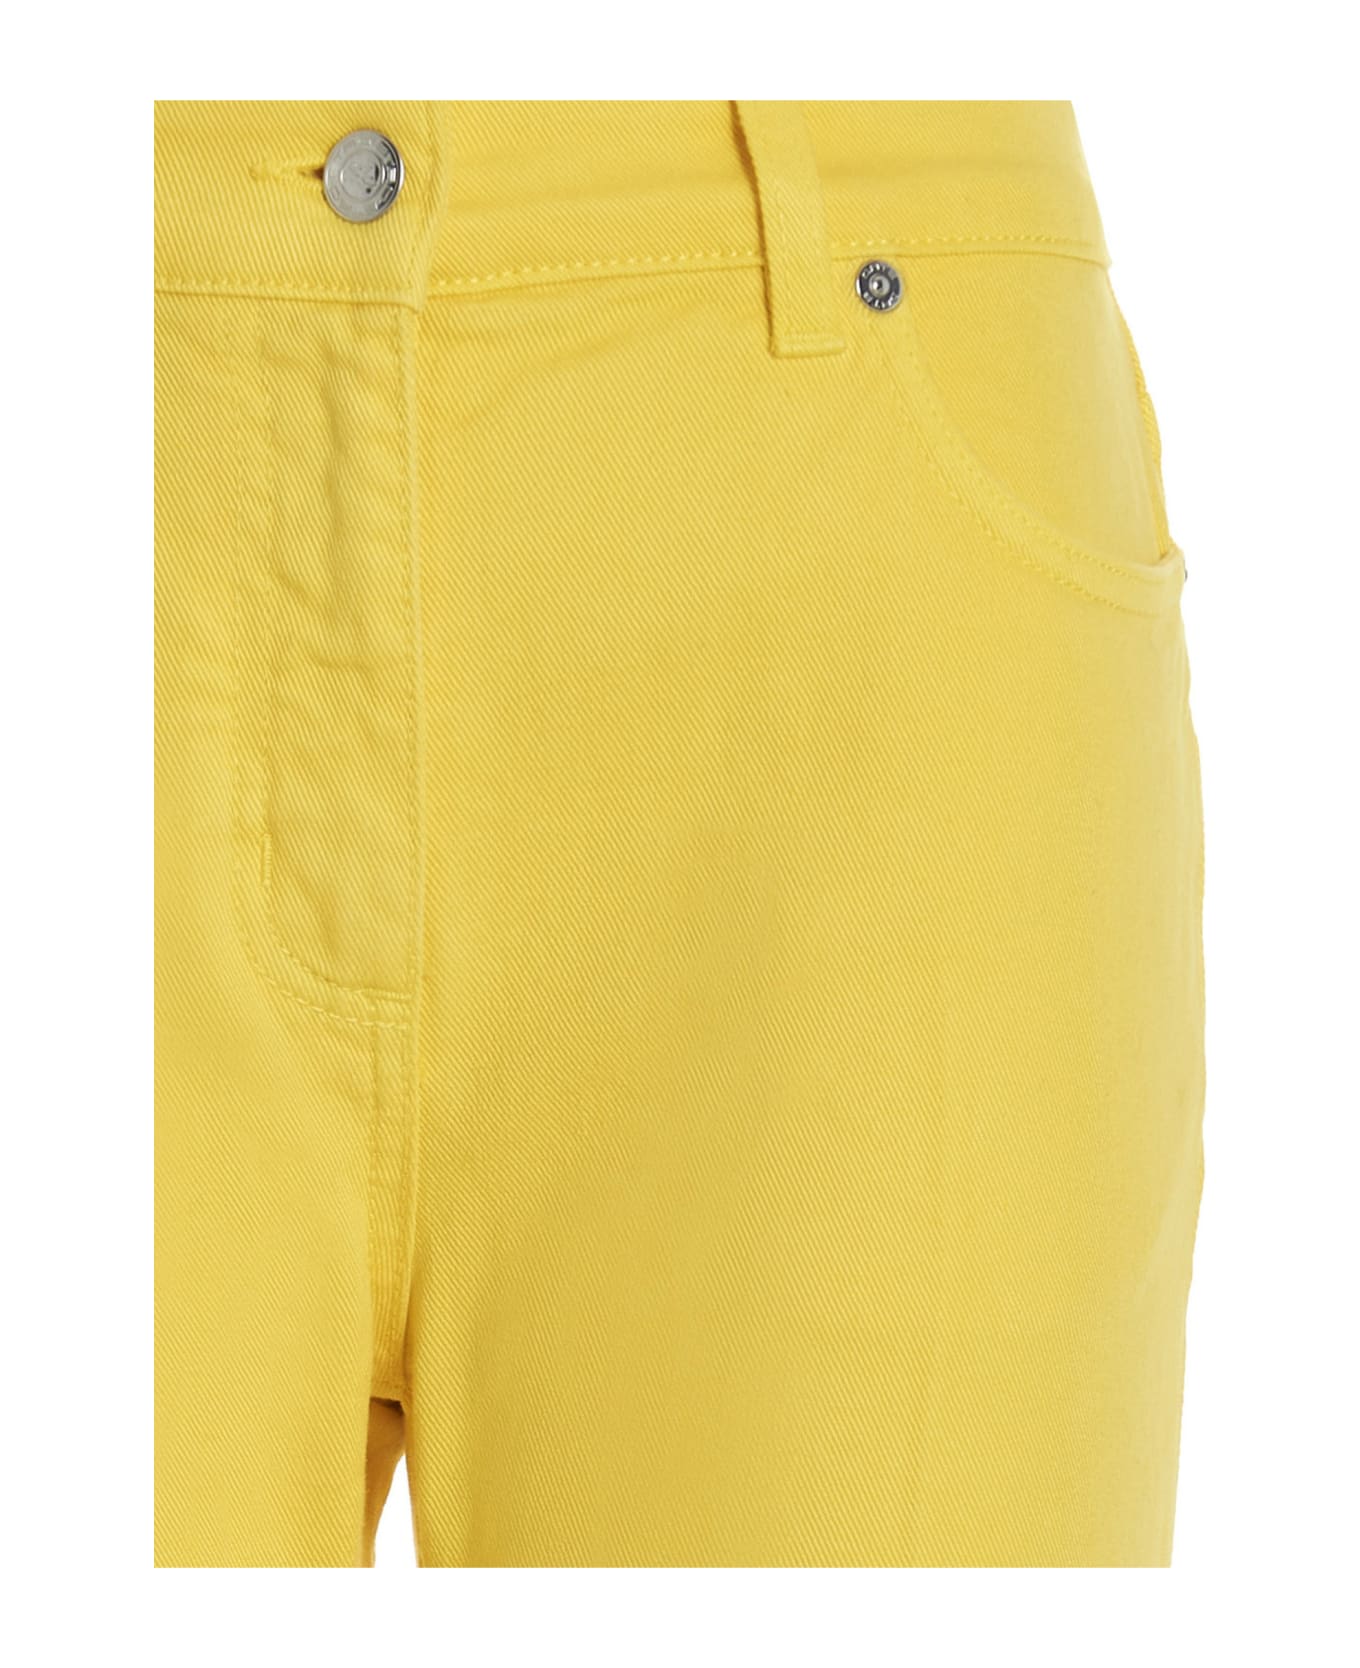 Etro Flared Jeans - Yellow